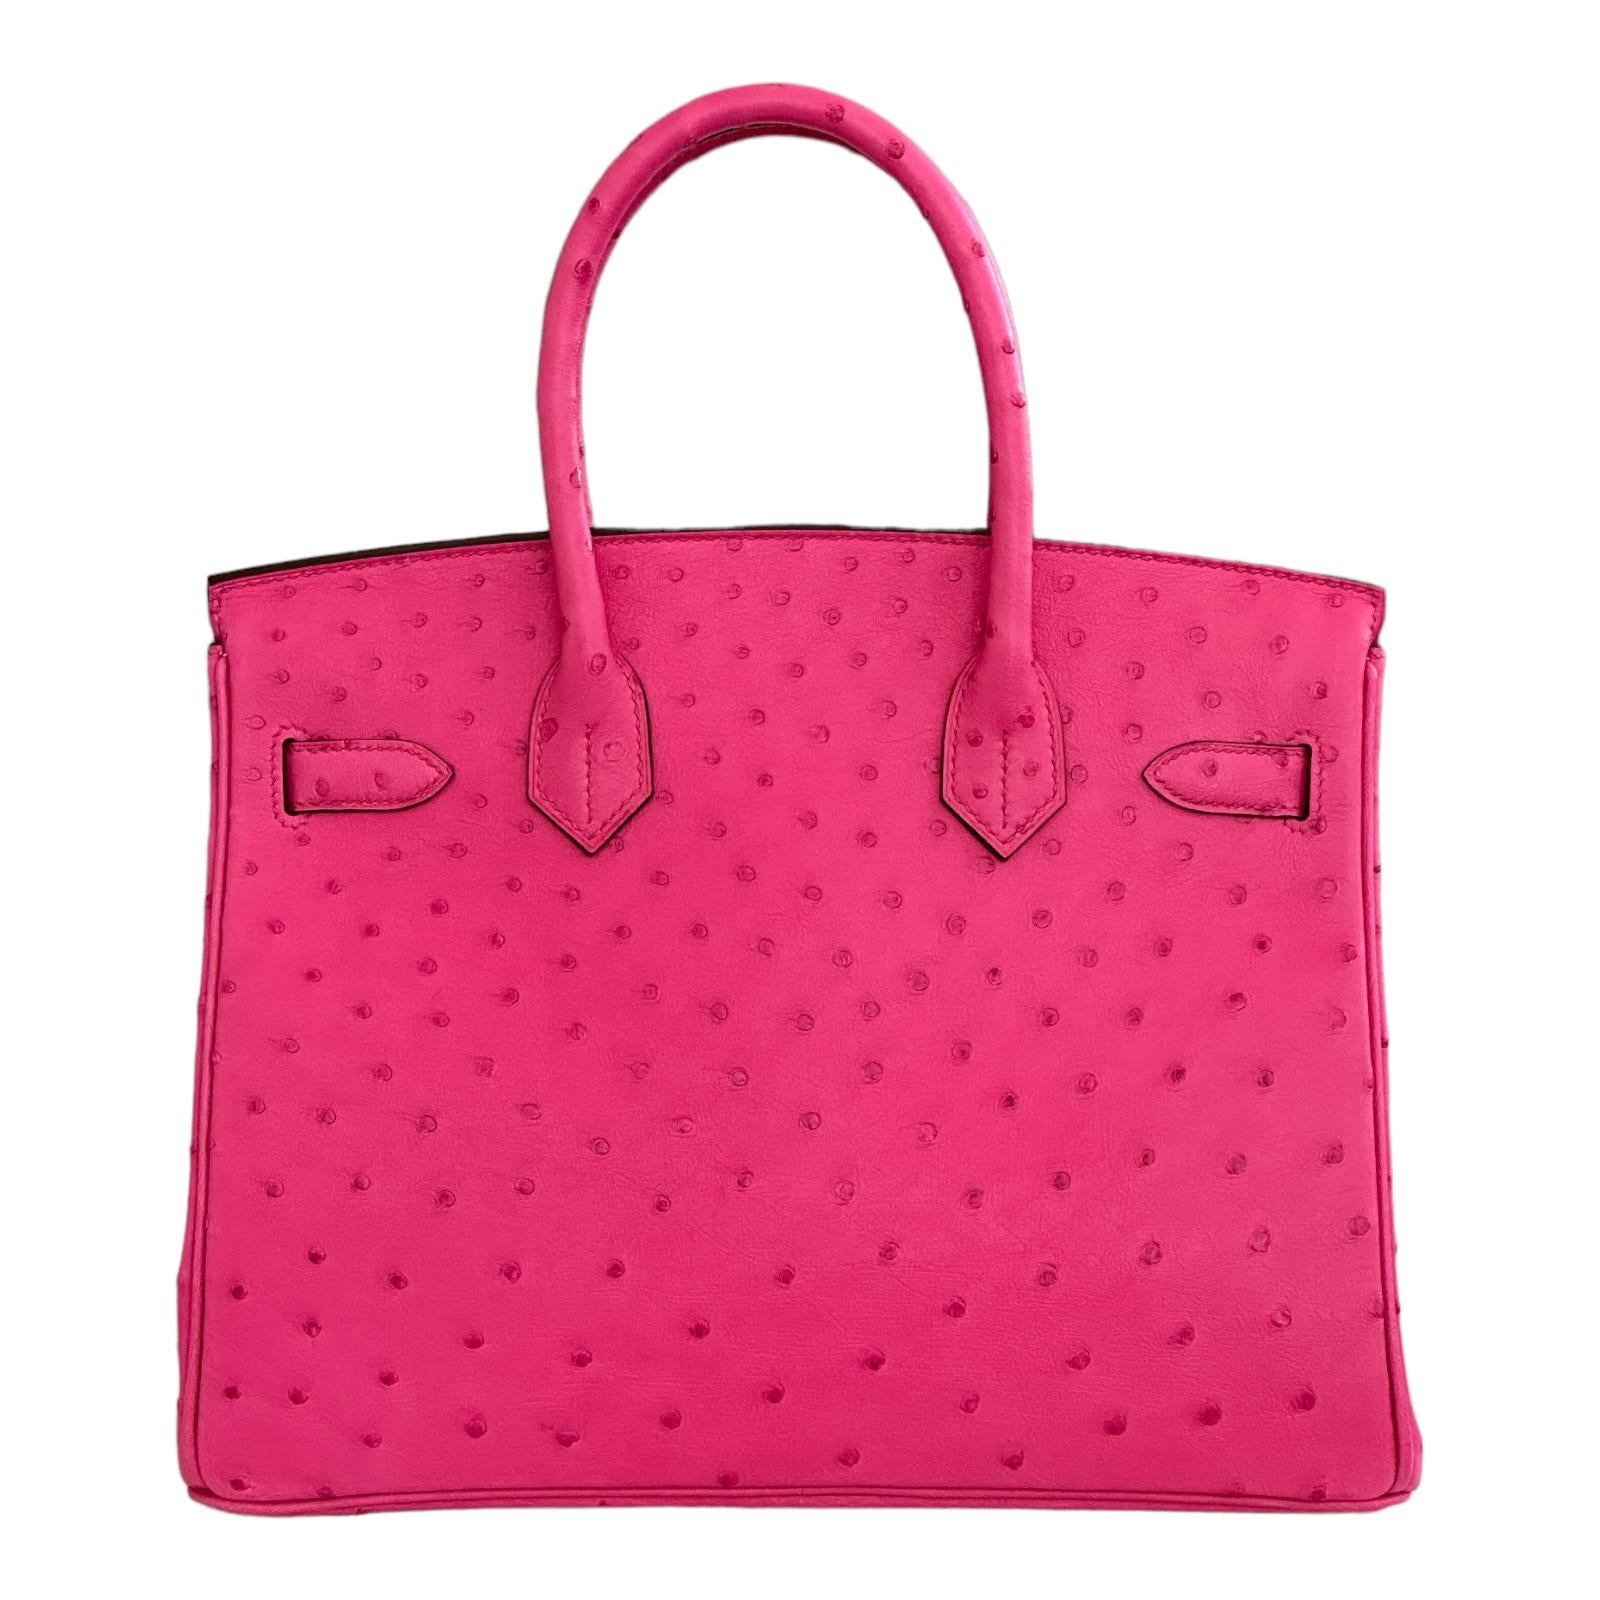 Hermes Birkin 
Size: 30cm
Color is Rose Tyrien
Rose tyrien is one of the most popular colors Hermes has done, so they brought it back!
The pink outside done in ostrich is just spectacular.  Open up your bag to an amazing contrasting color, Lime.
No